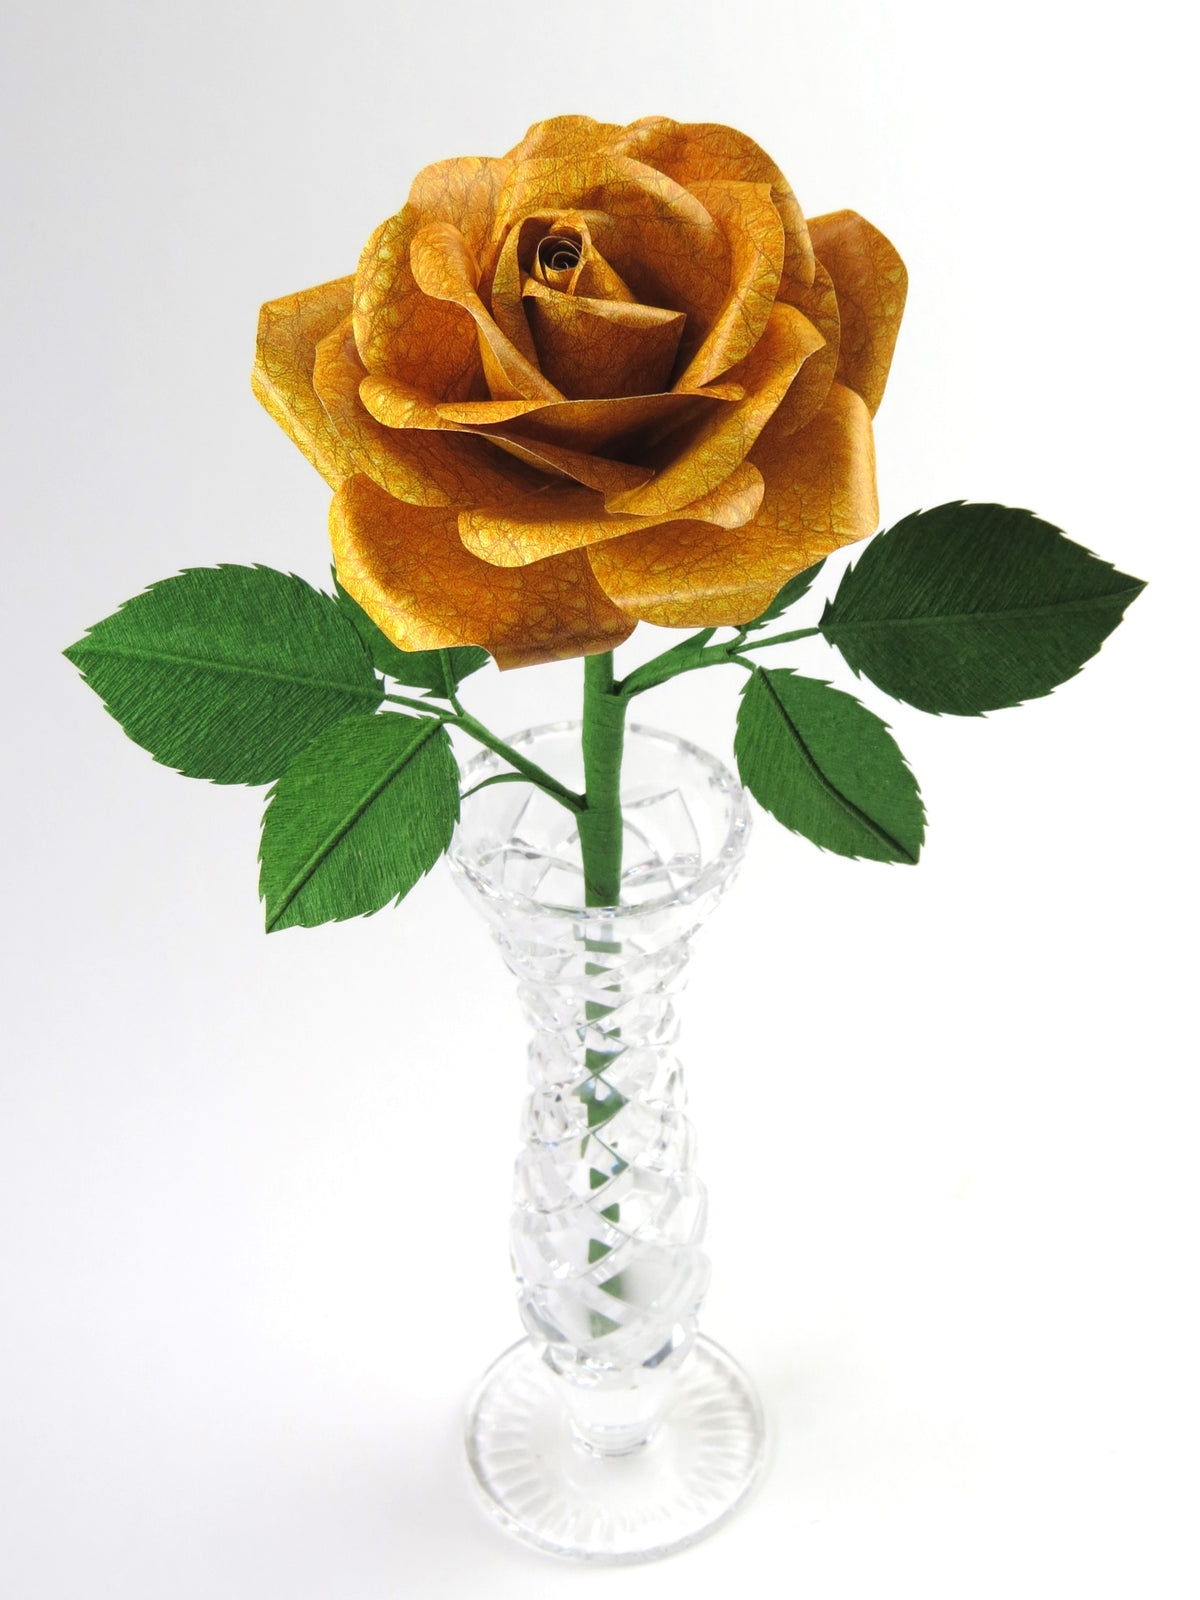 Yellow grain leather paper rose with six leaves standing in a narrow glass vase against a white background